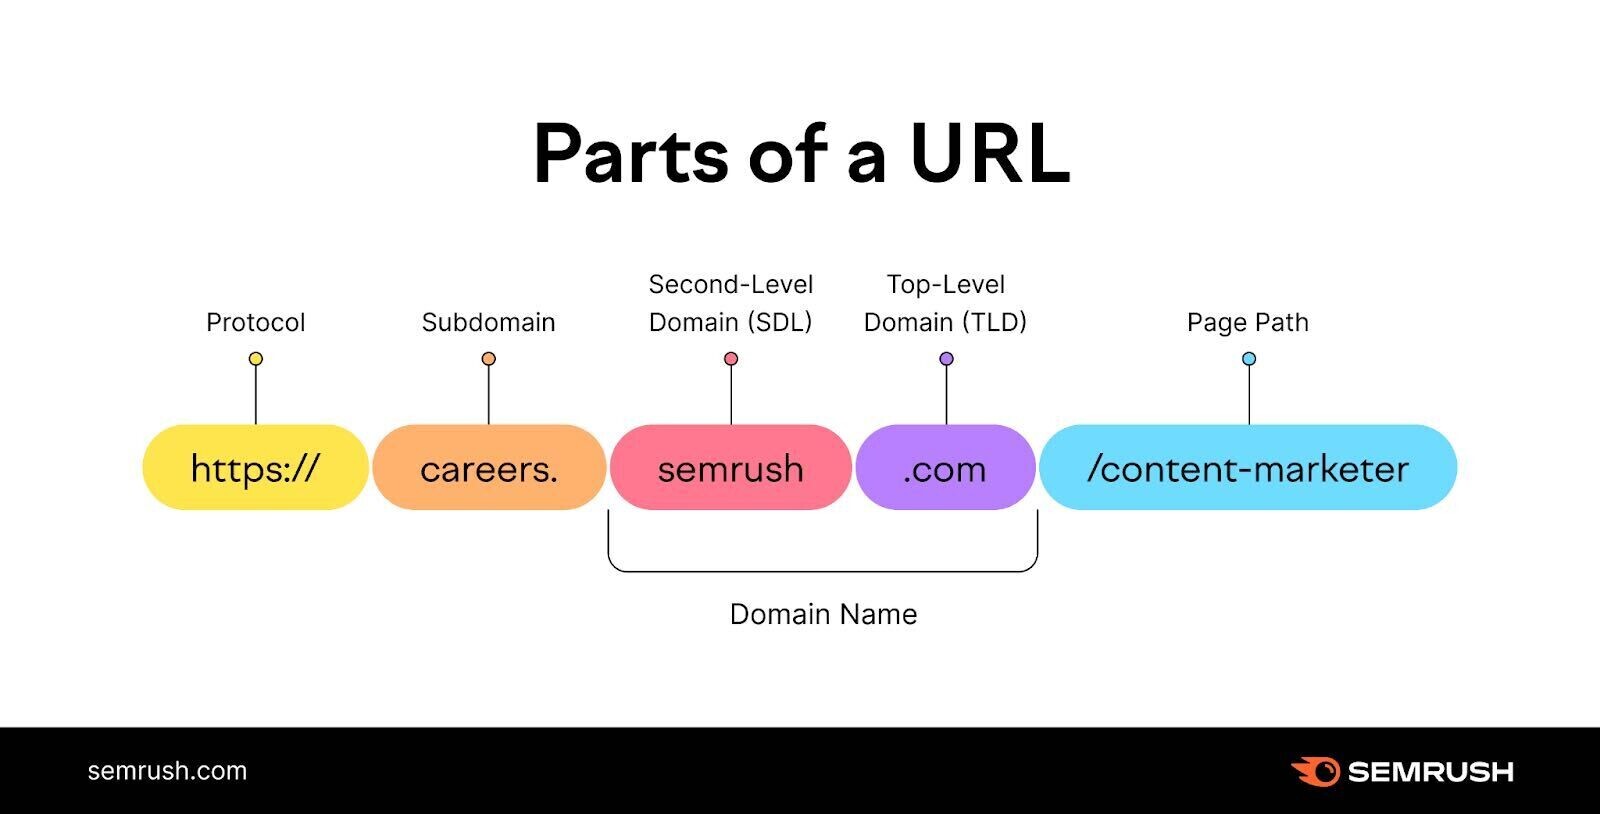 An infographic showing all URL parts, including protocol, subdomain, second-level domain, top-level domain and page path